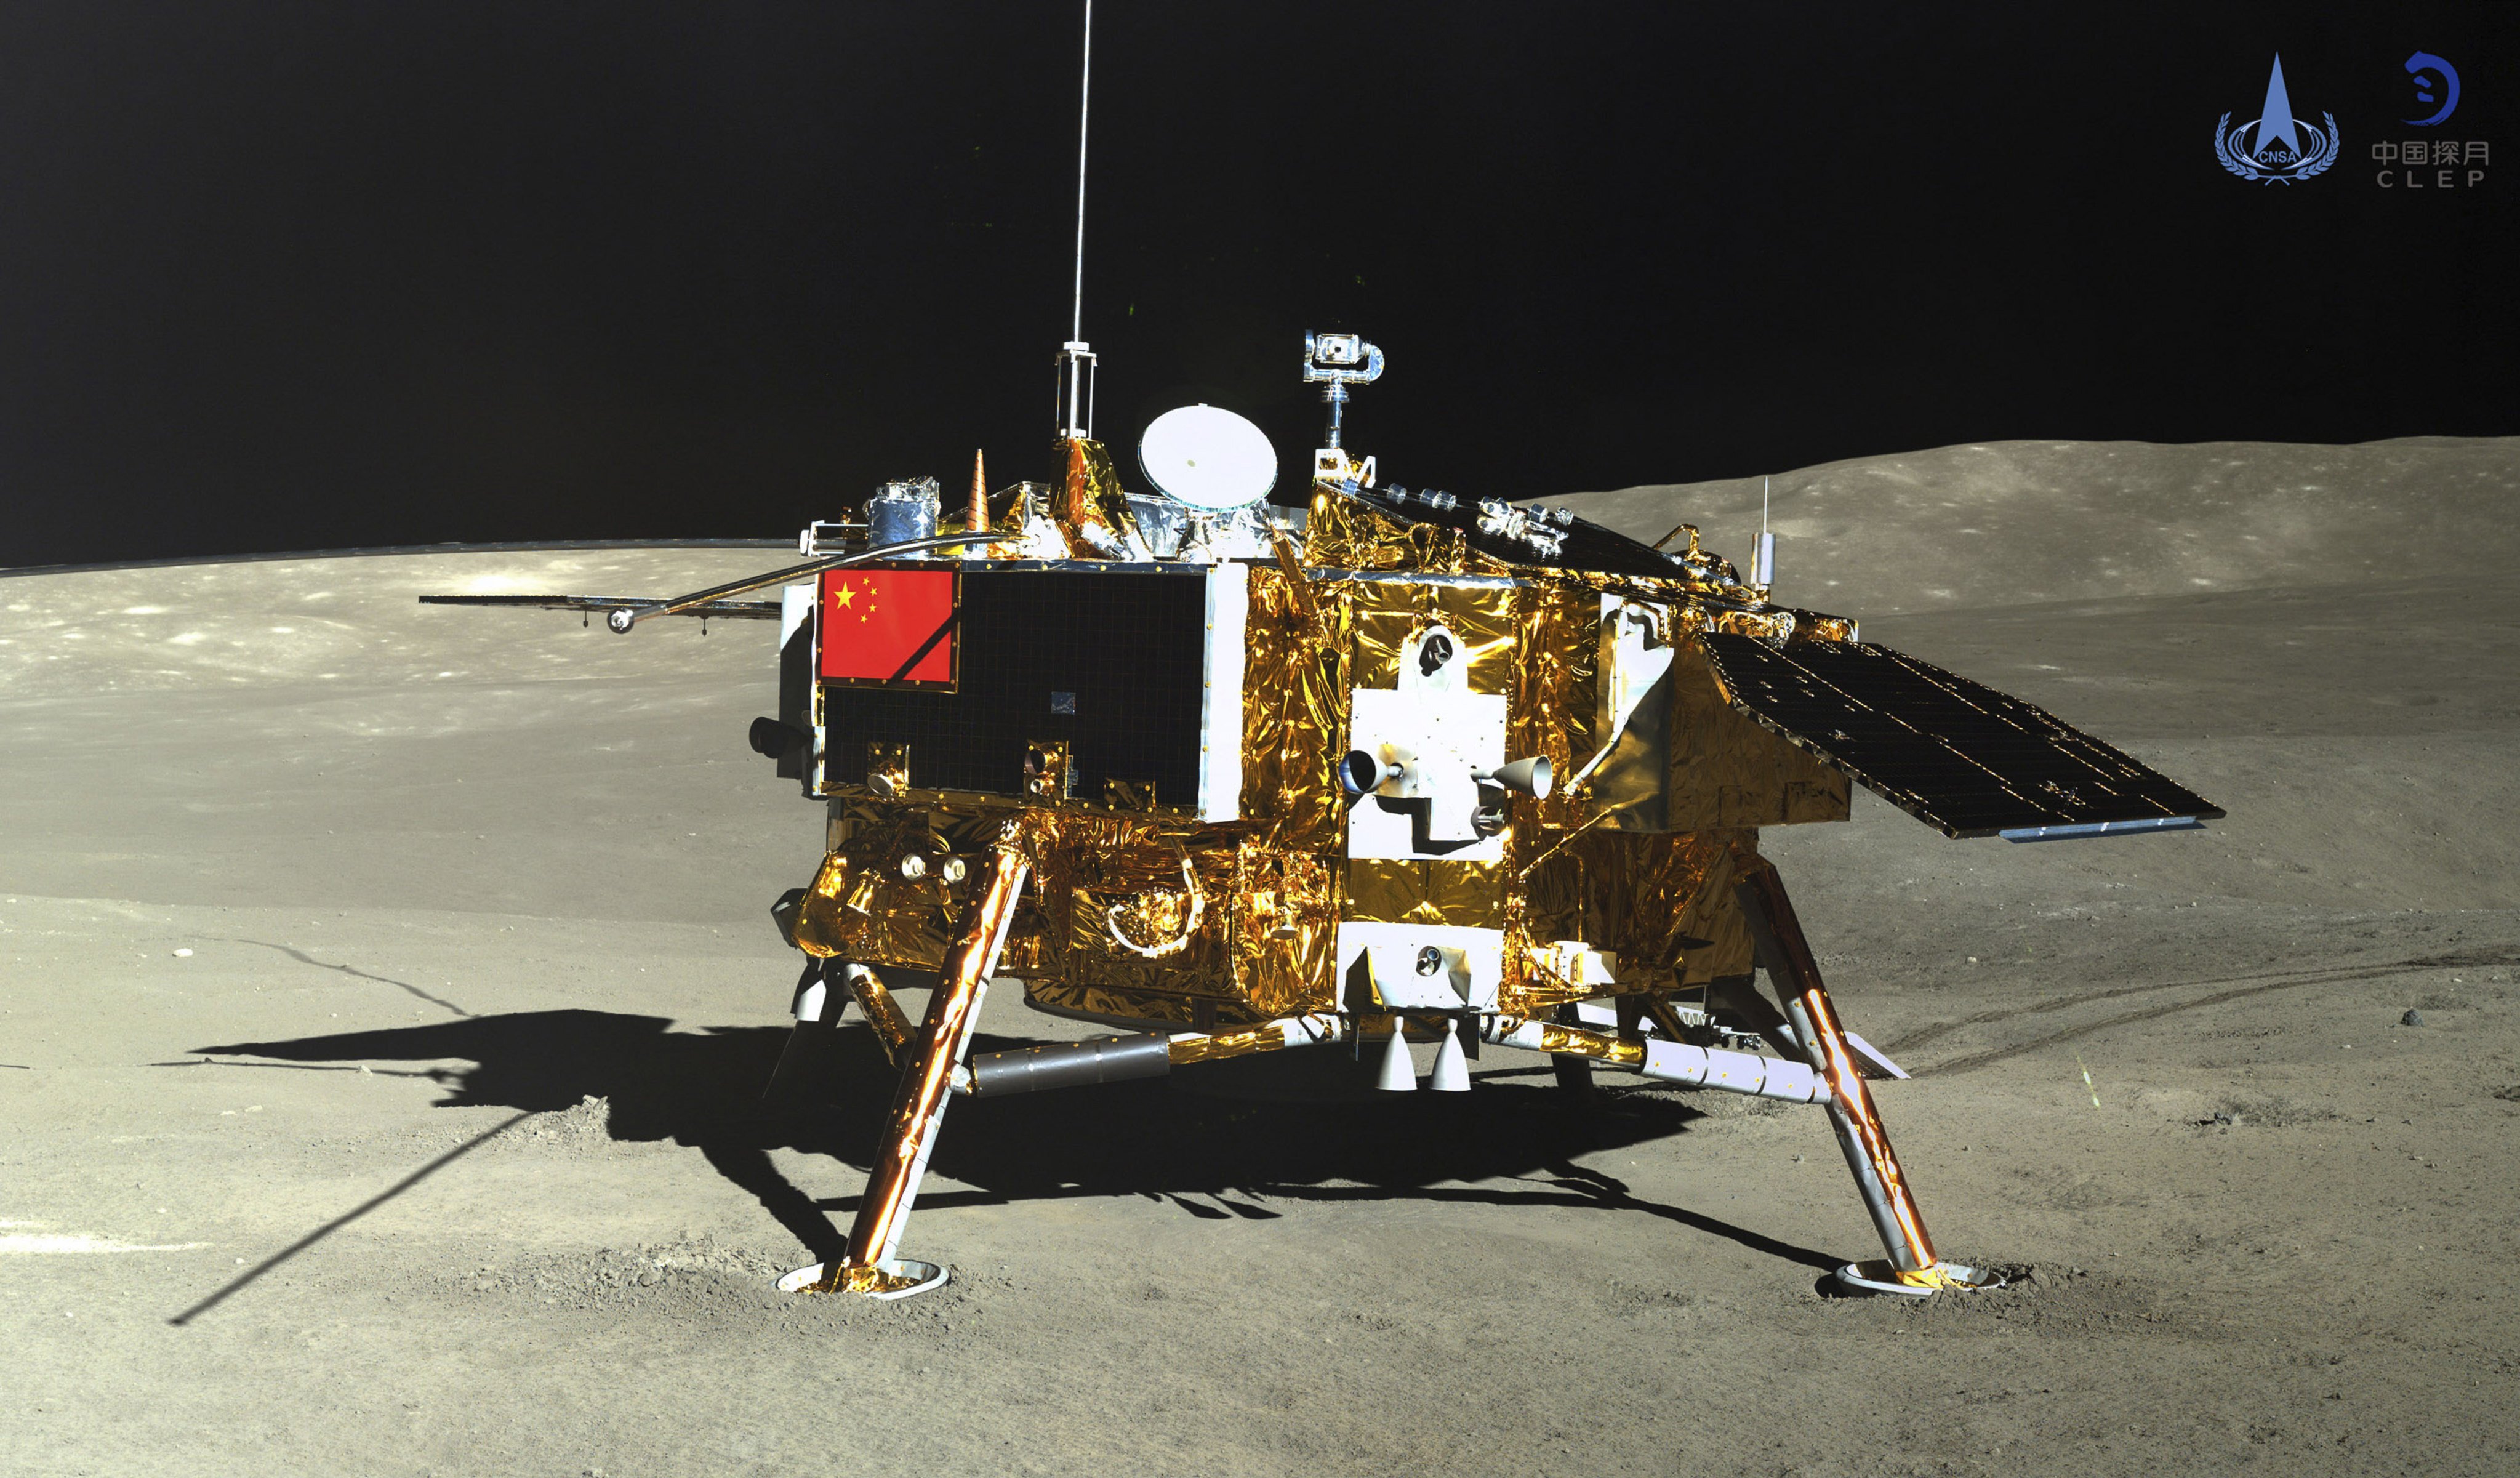 The Chang’e 4 mission saw China put a lander on the far side of the moon. Photo: AP